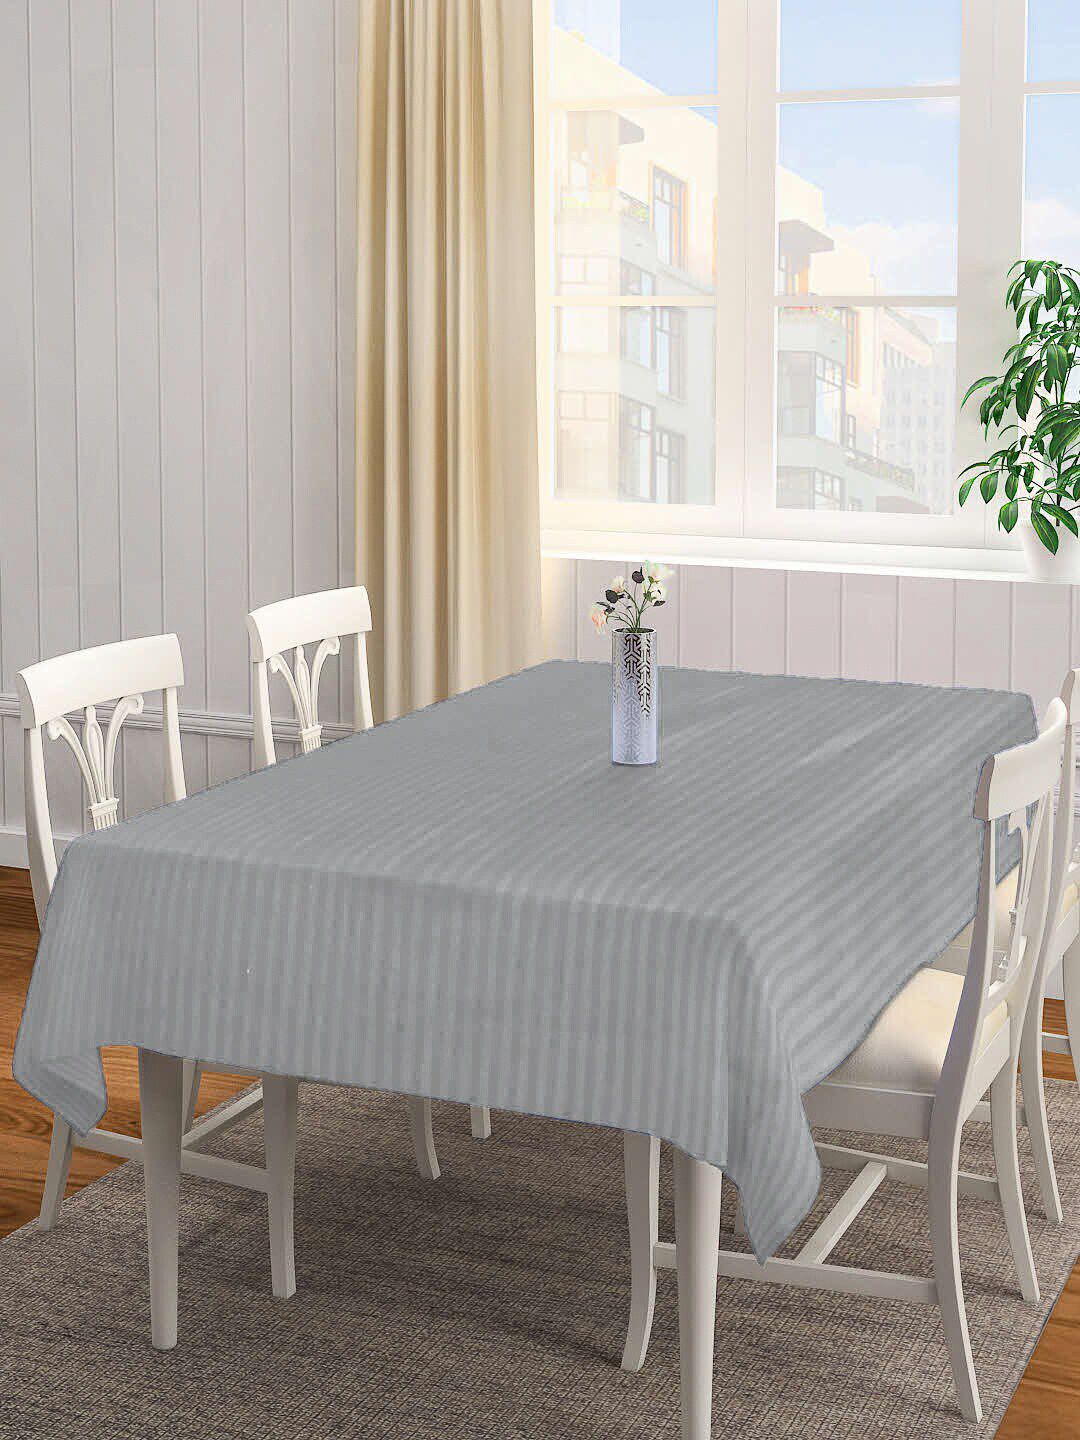 Arrabi Grey Striped 8 Seater Rectangular Table Covers Price in India